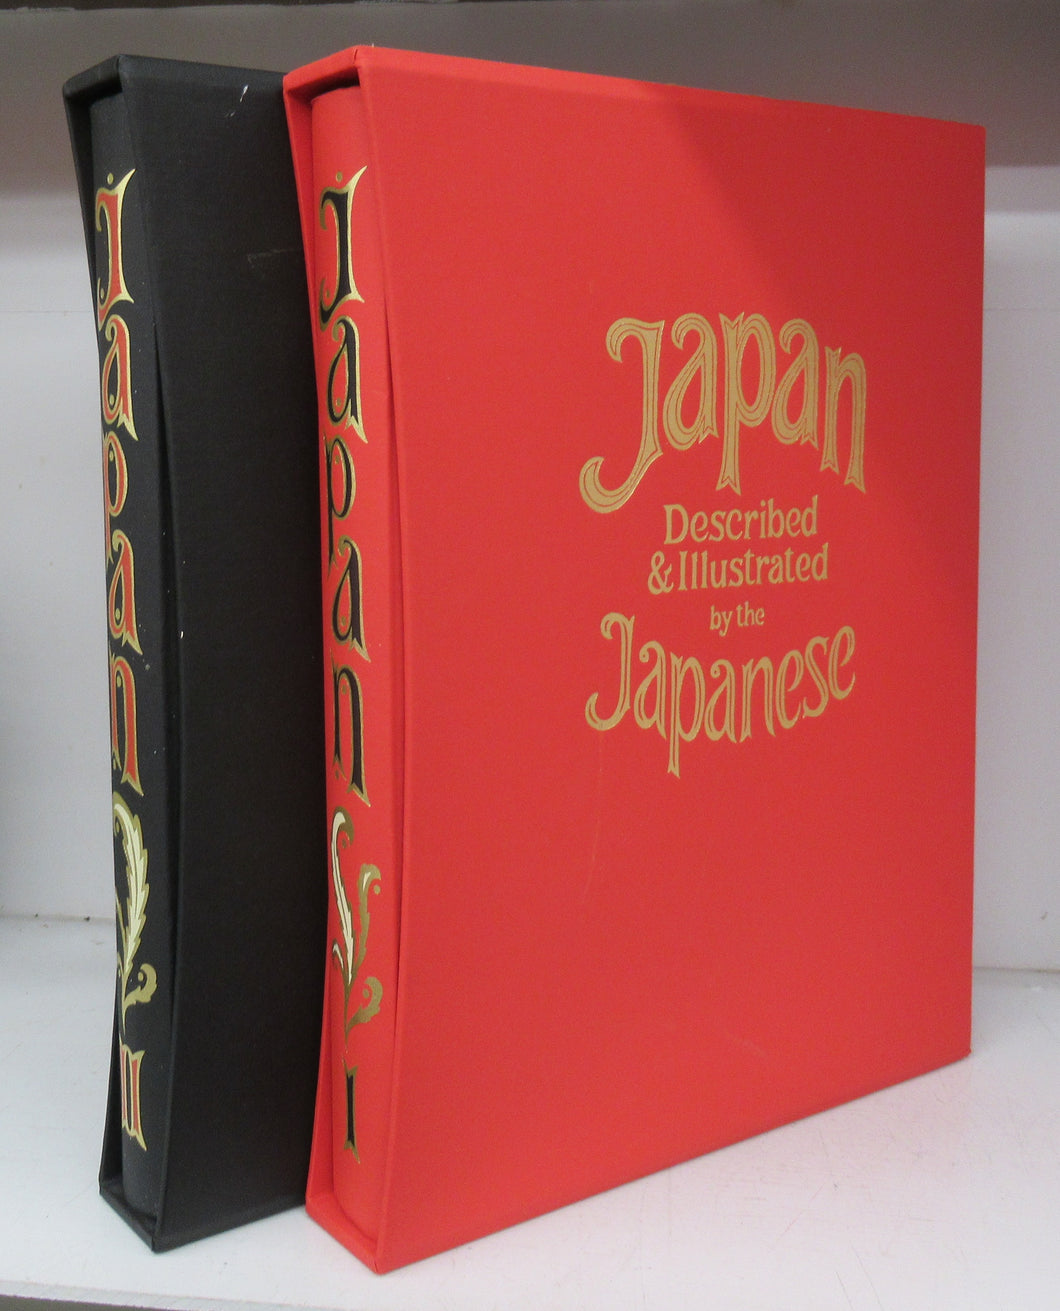 Japan Described and Illustrated by the Japanese. Written by Eminent Japanese Authorities and Scholars